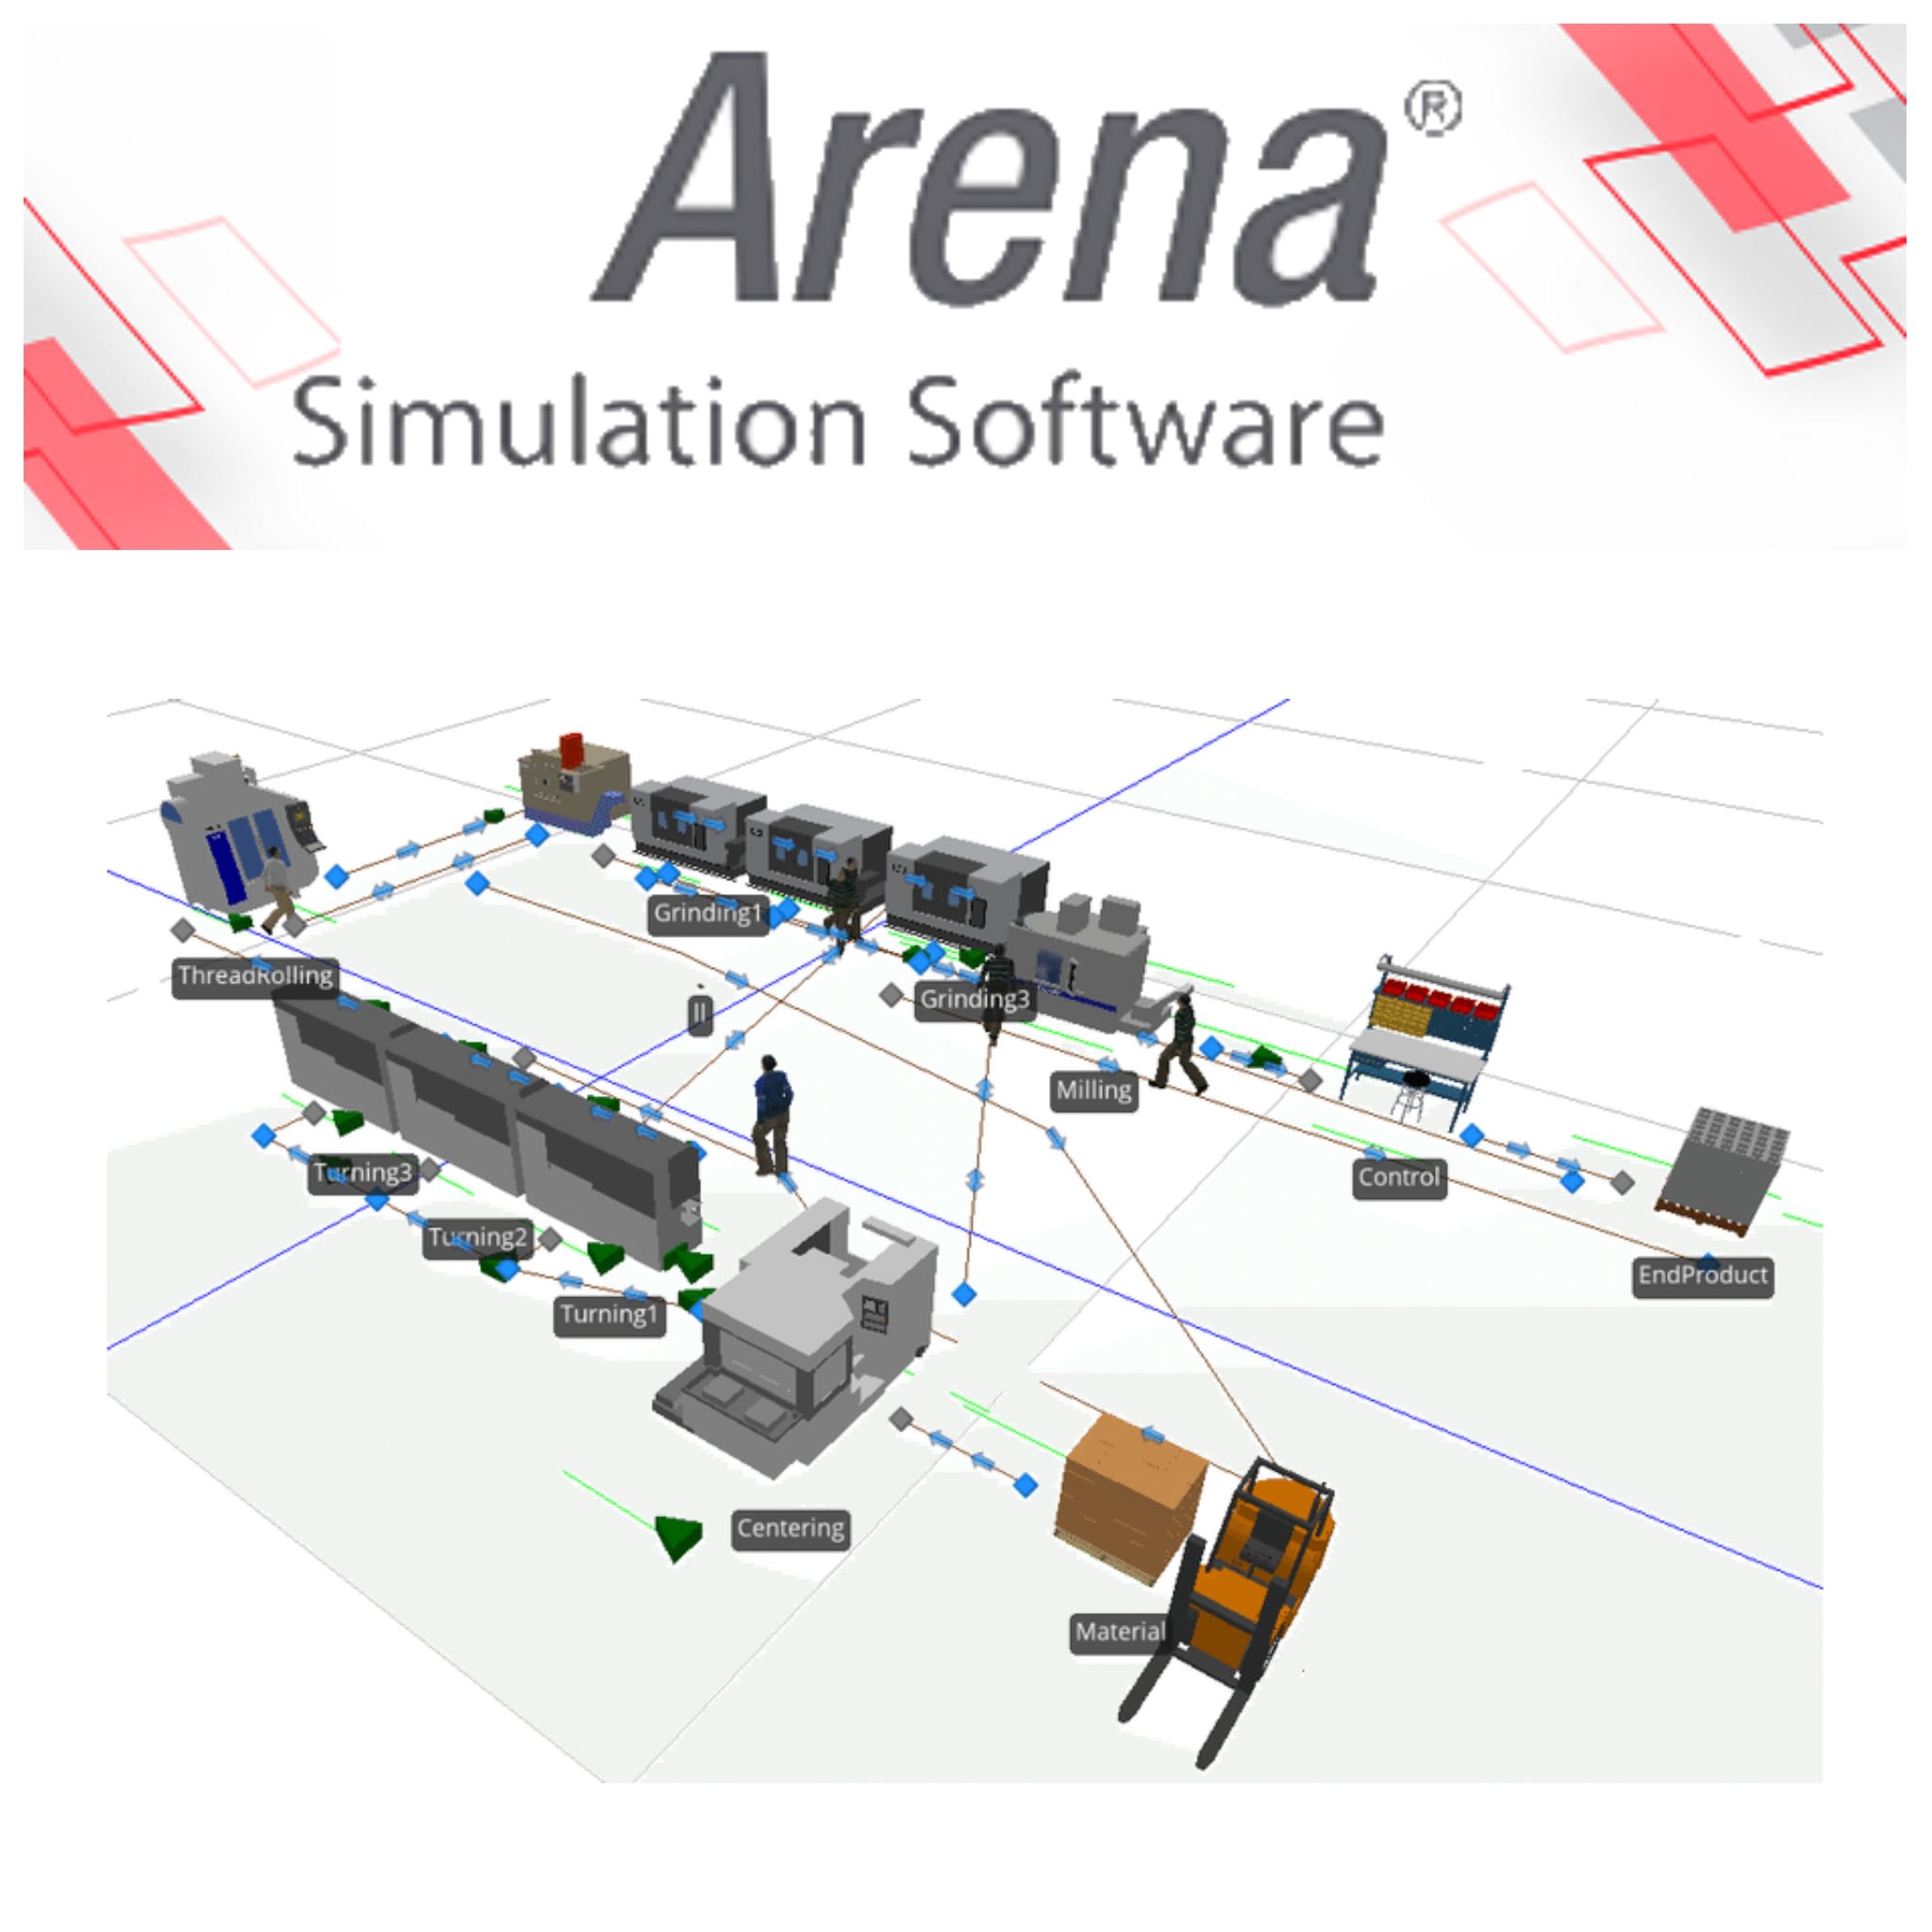 assist you in industrial engineering and arena simulation